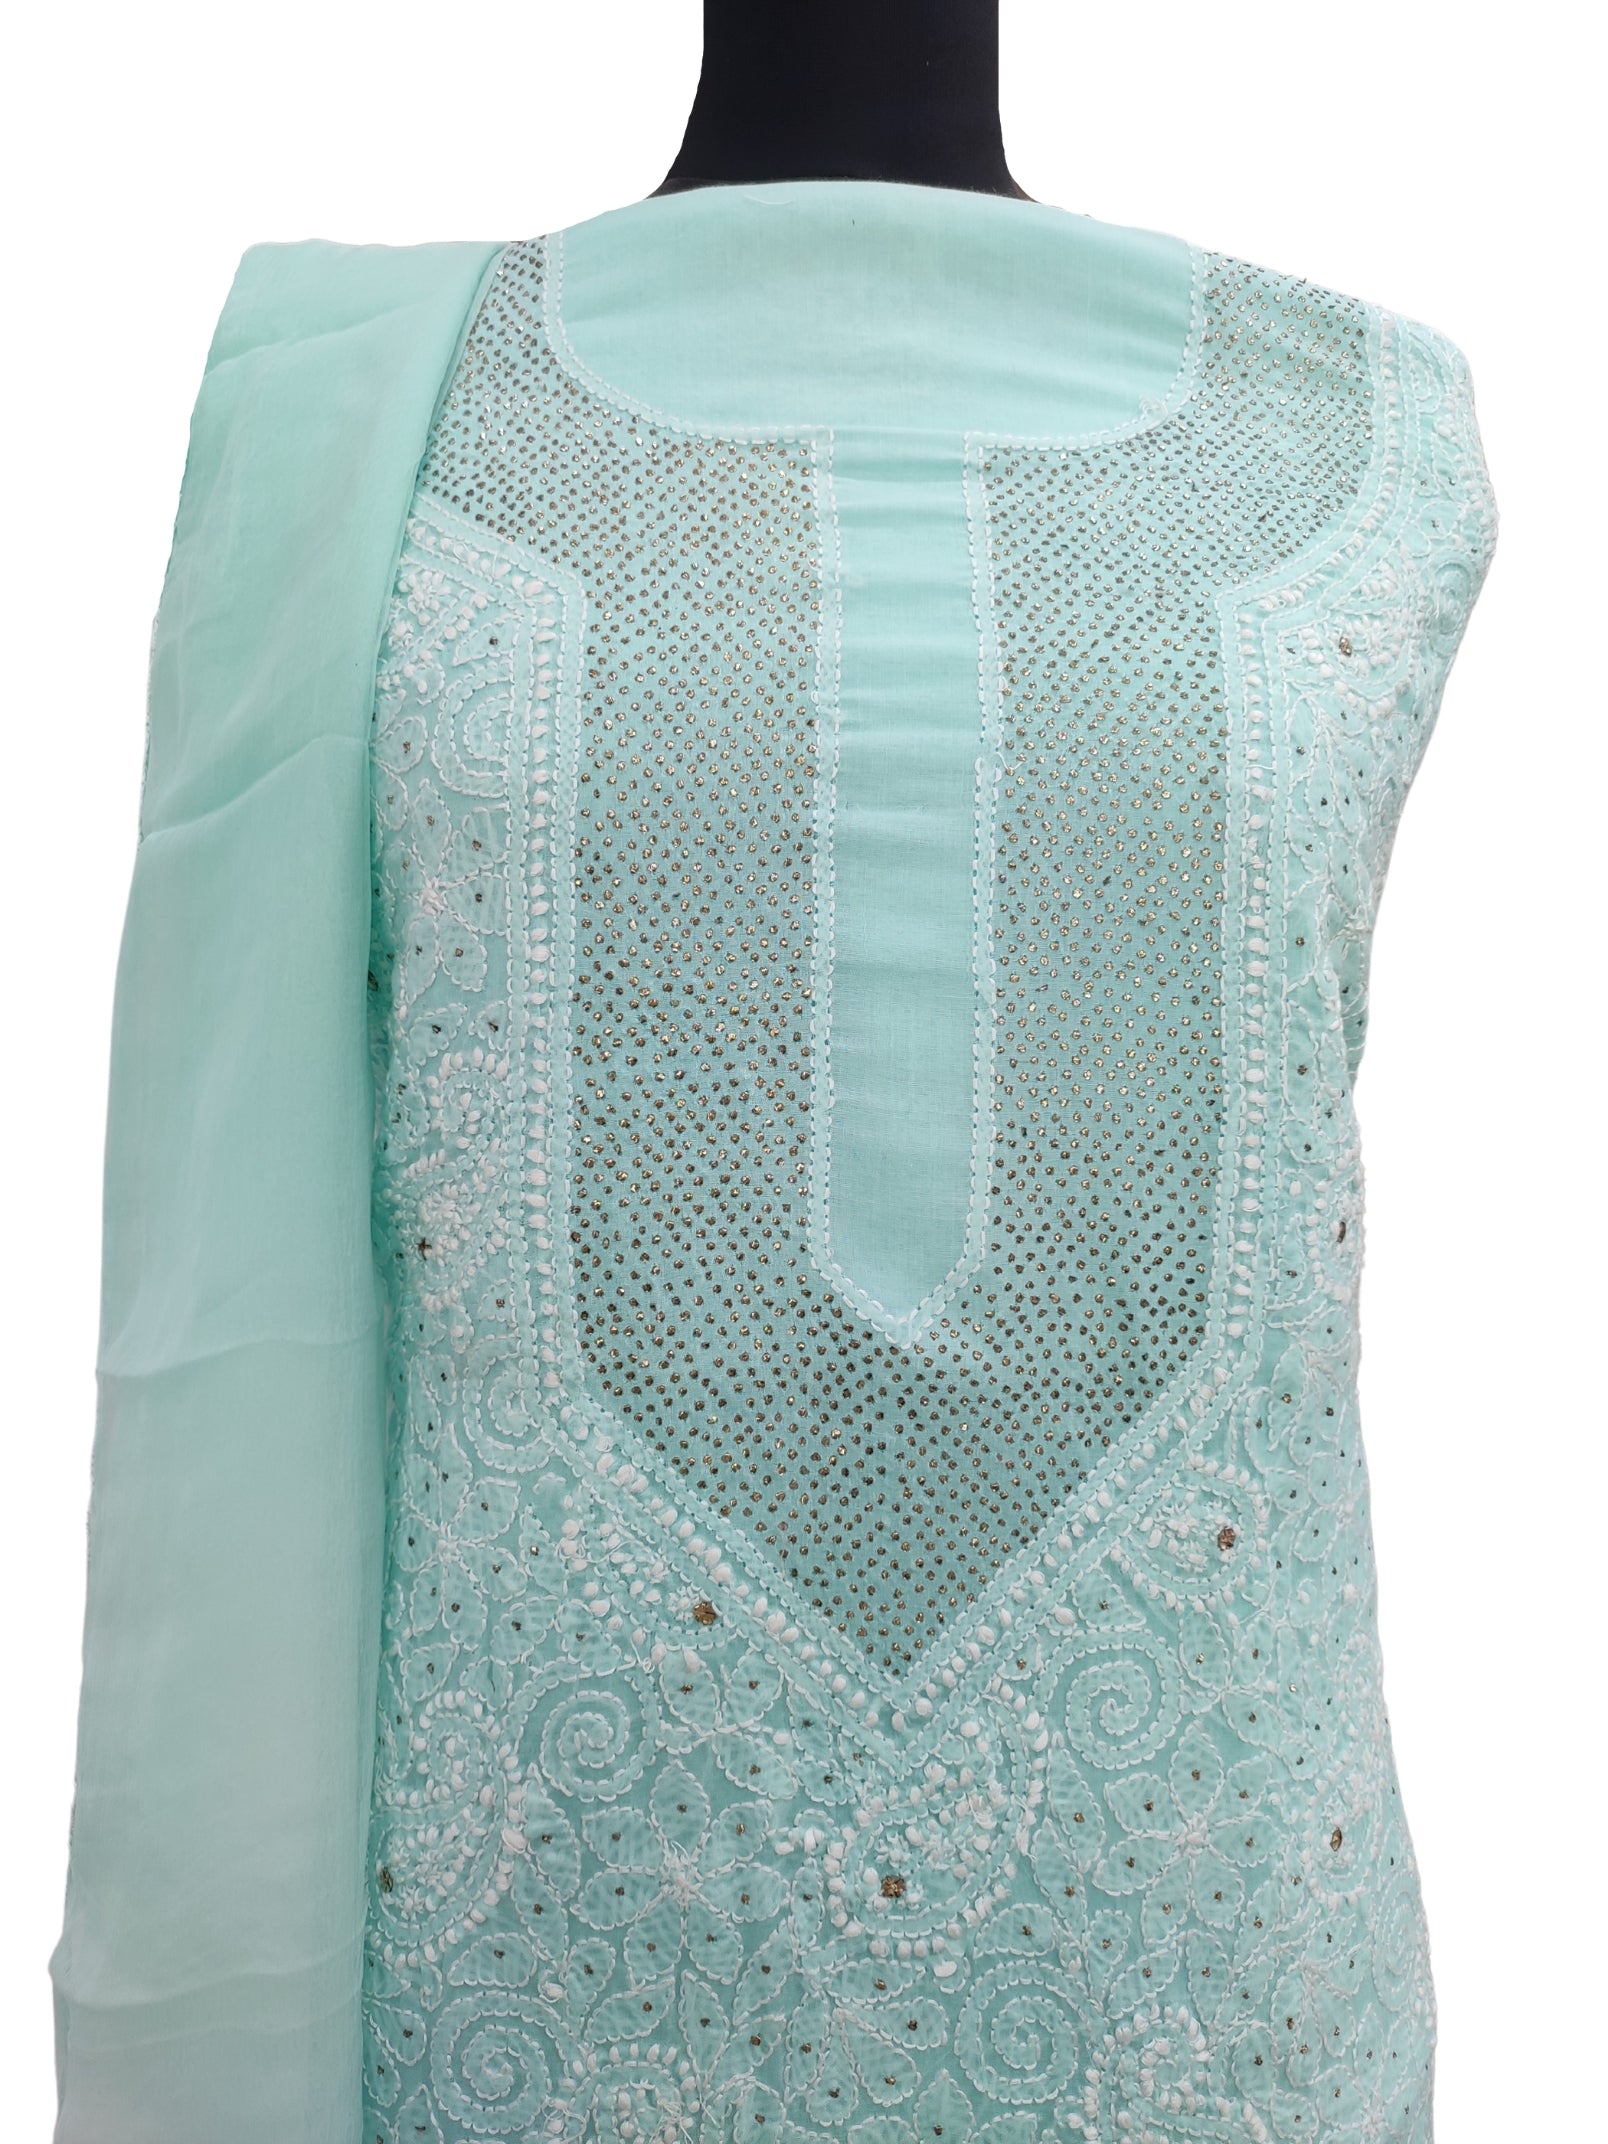 Shyamal Chikan Hand Embroidered Sea Green Cotton Lucknowi Chikankari Unstitched Suit Piece With Mukaish Work - S12199 - Shyamal Chikan